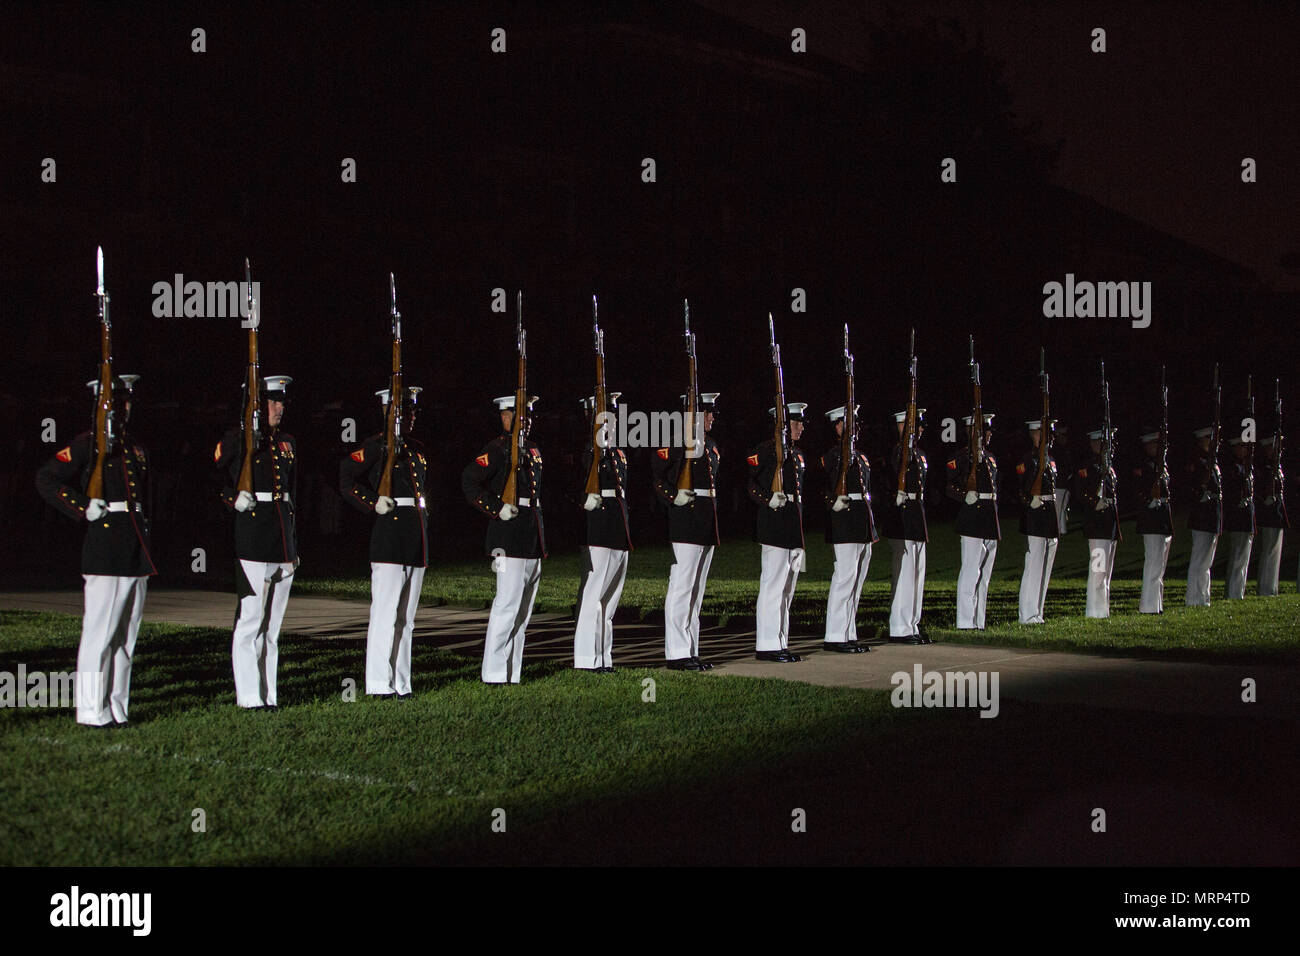 The Marine Corps Silent Drill Platoon performs during an evening parade at Marine Barracks Washington, Washington, D.C., June 23, 2017. Evening parades are held as a means of honoring senior officials, distinguished citizens and supporters of the Marine Corps. (U.S. Marine Corps photo by Stephon L. McRae) Stock Photo